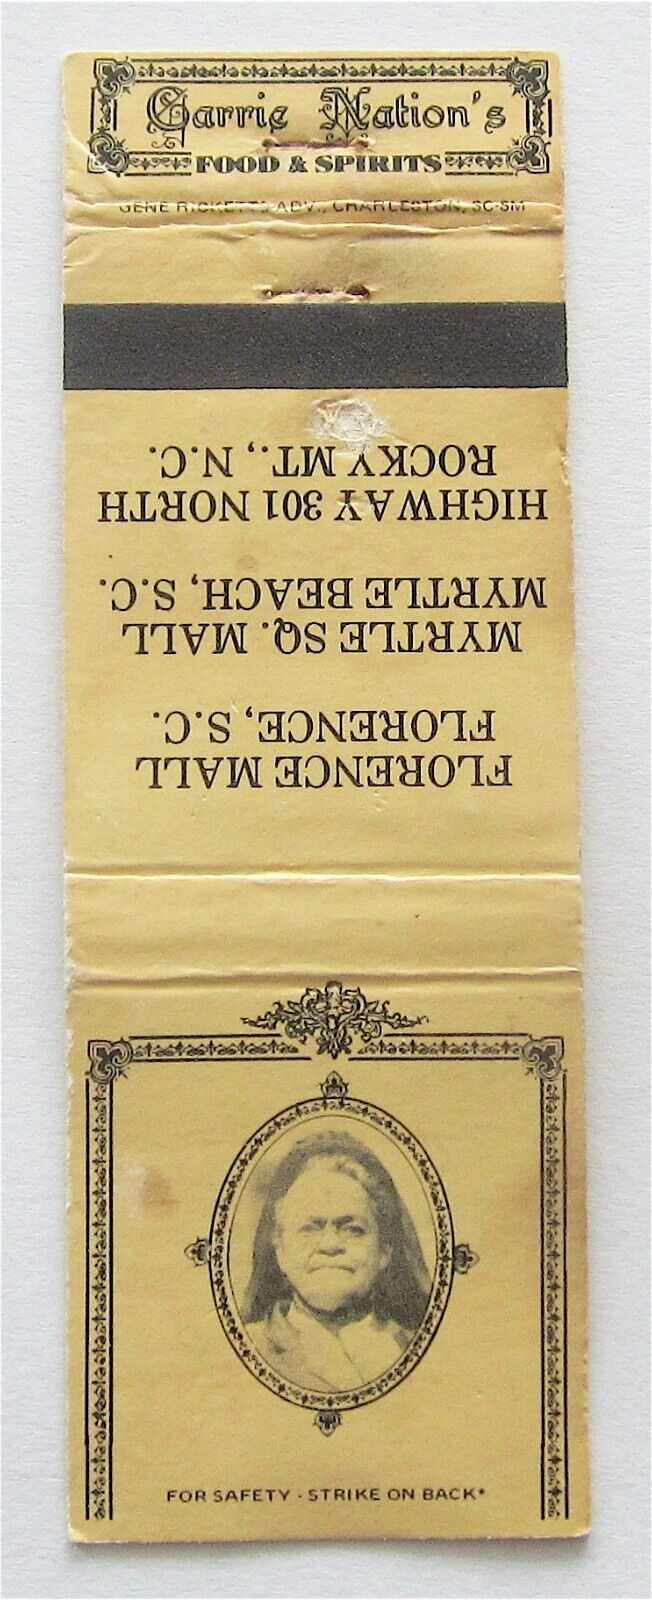 FLORENCE MALL, FLORENCE SC, MYRTLE SQ. MALL, MYRTLE BEACN, S.C. MATCHBOOK COVER